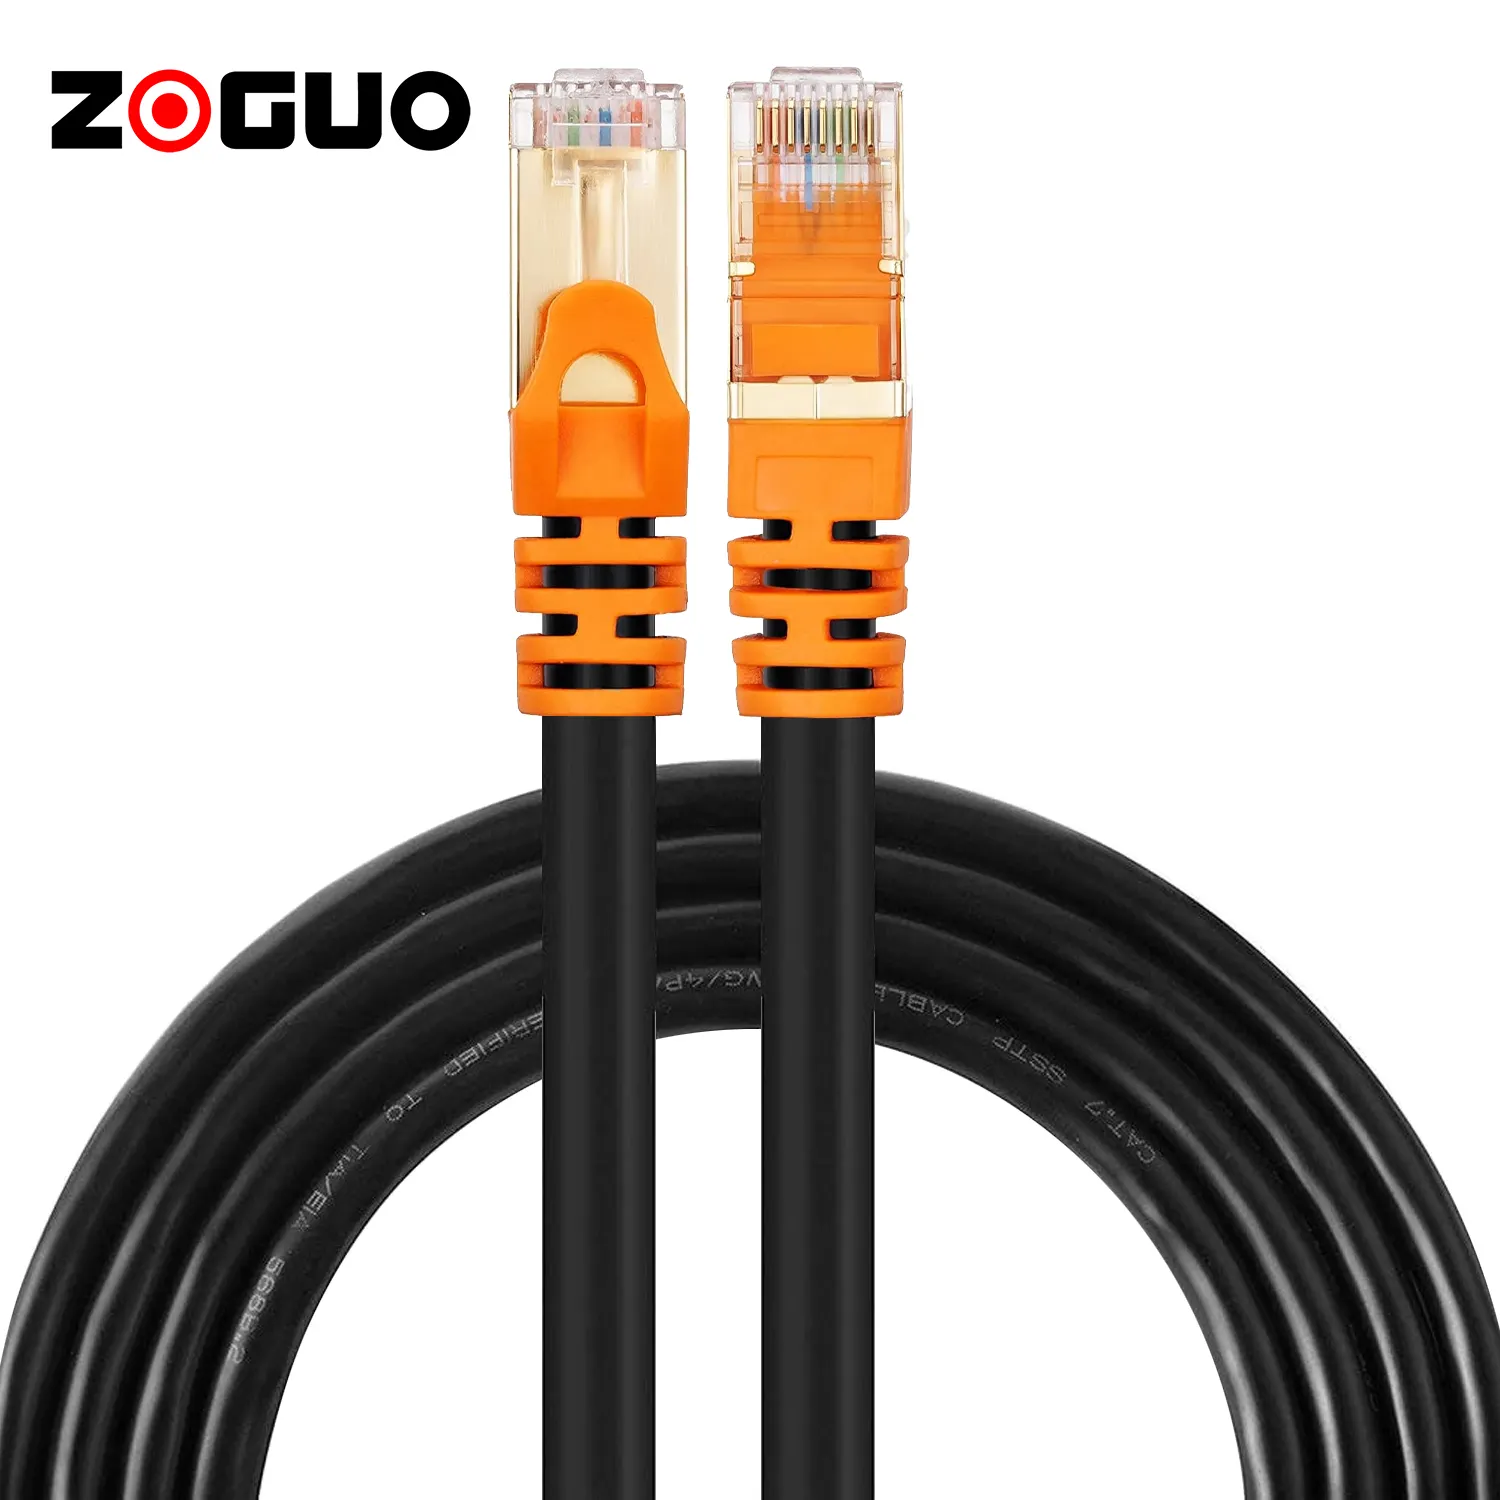 gigabit network cable